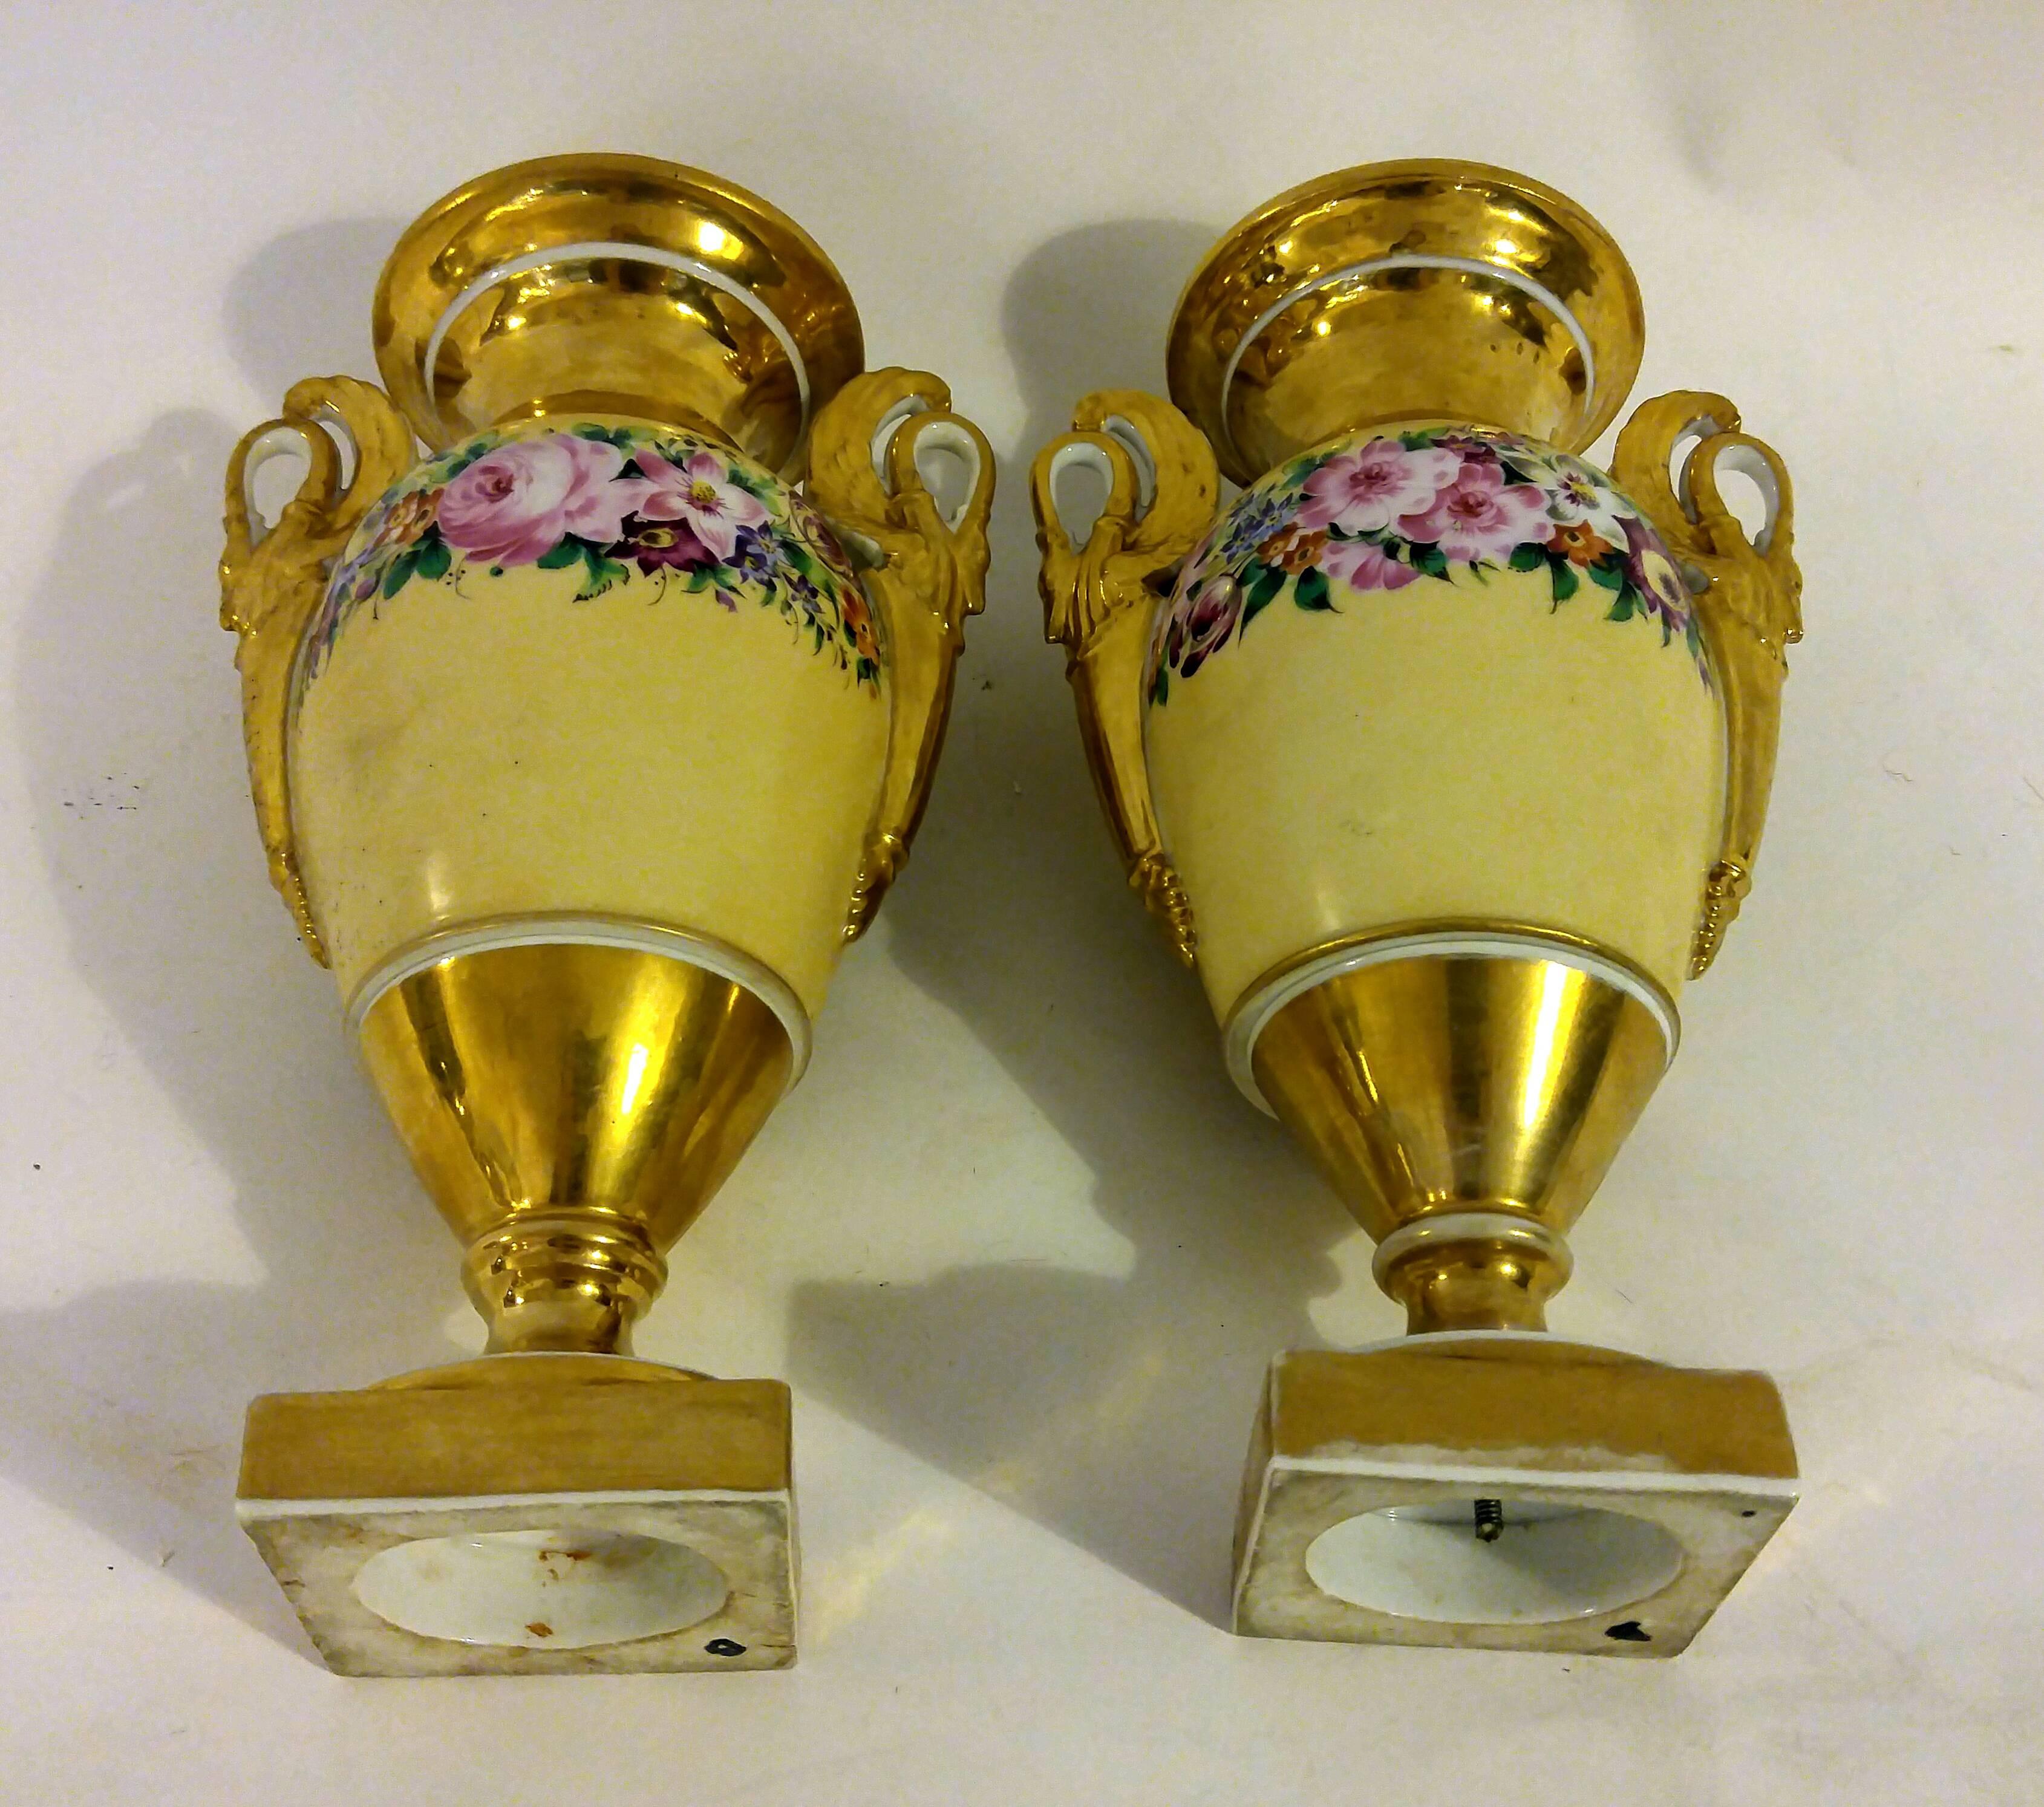 Mid-19th Century 19th century Old Paris Porcelain Urn Pair with Swan Handles For Sale